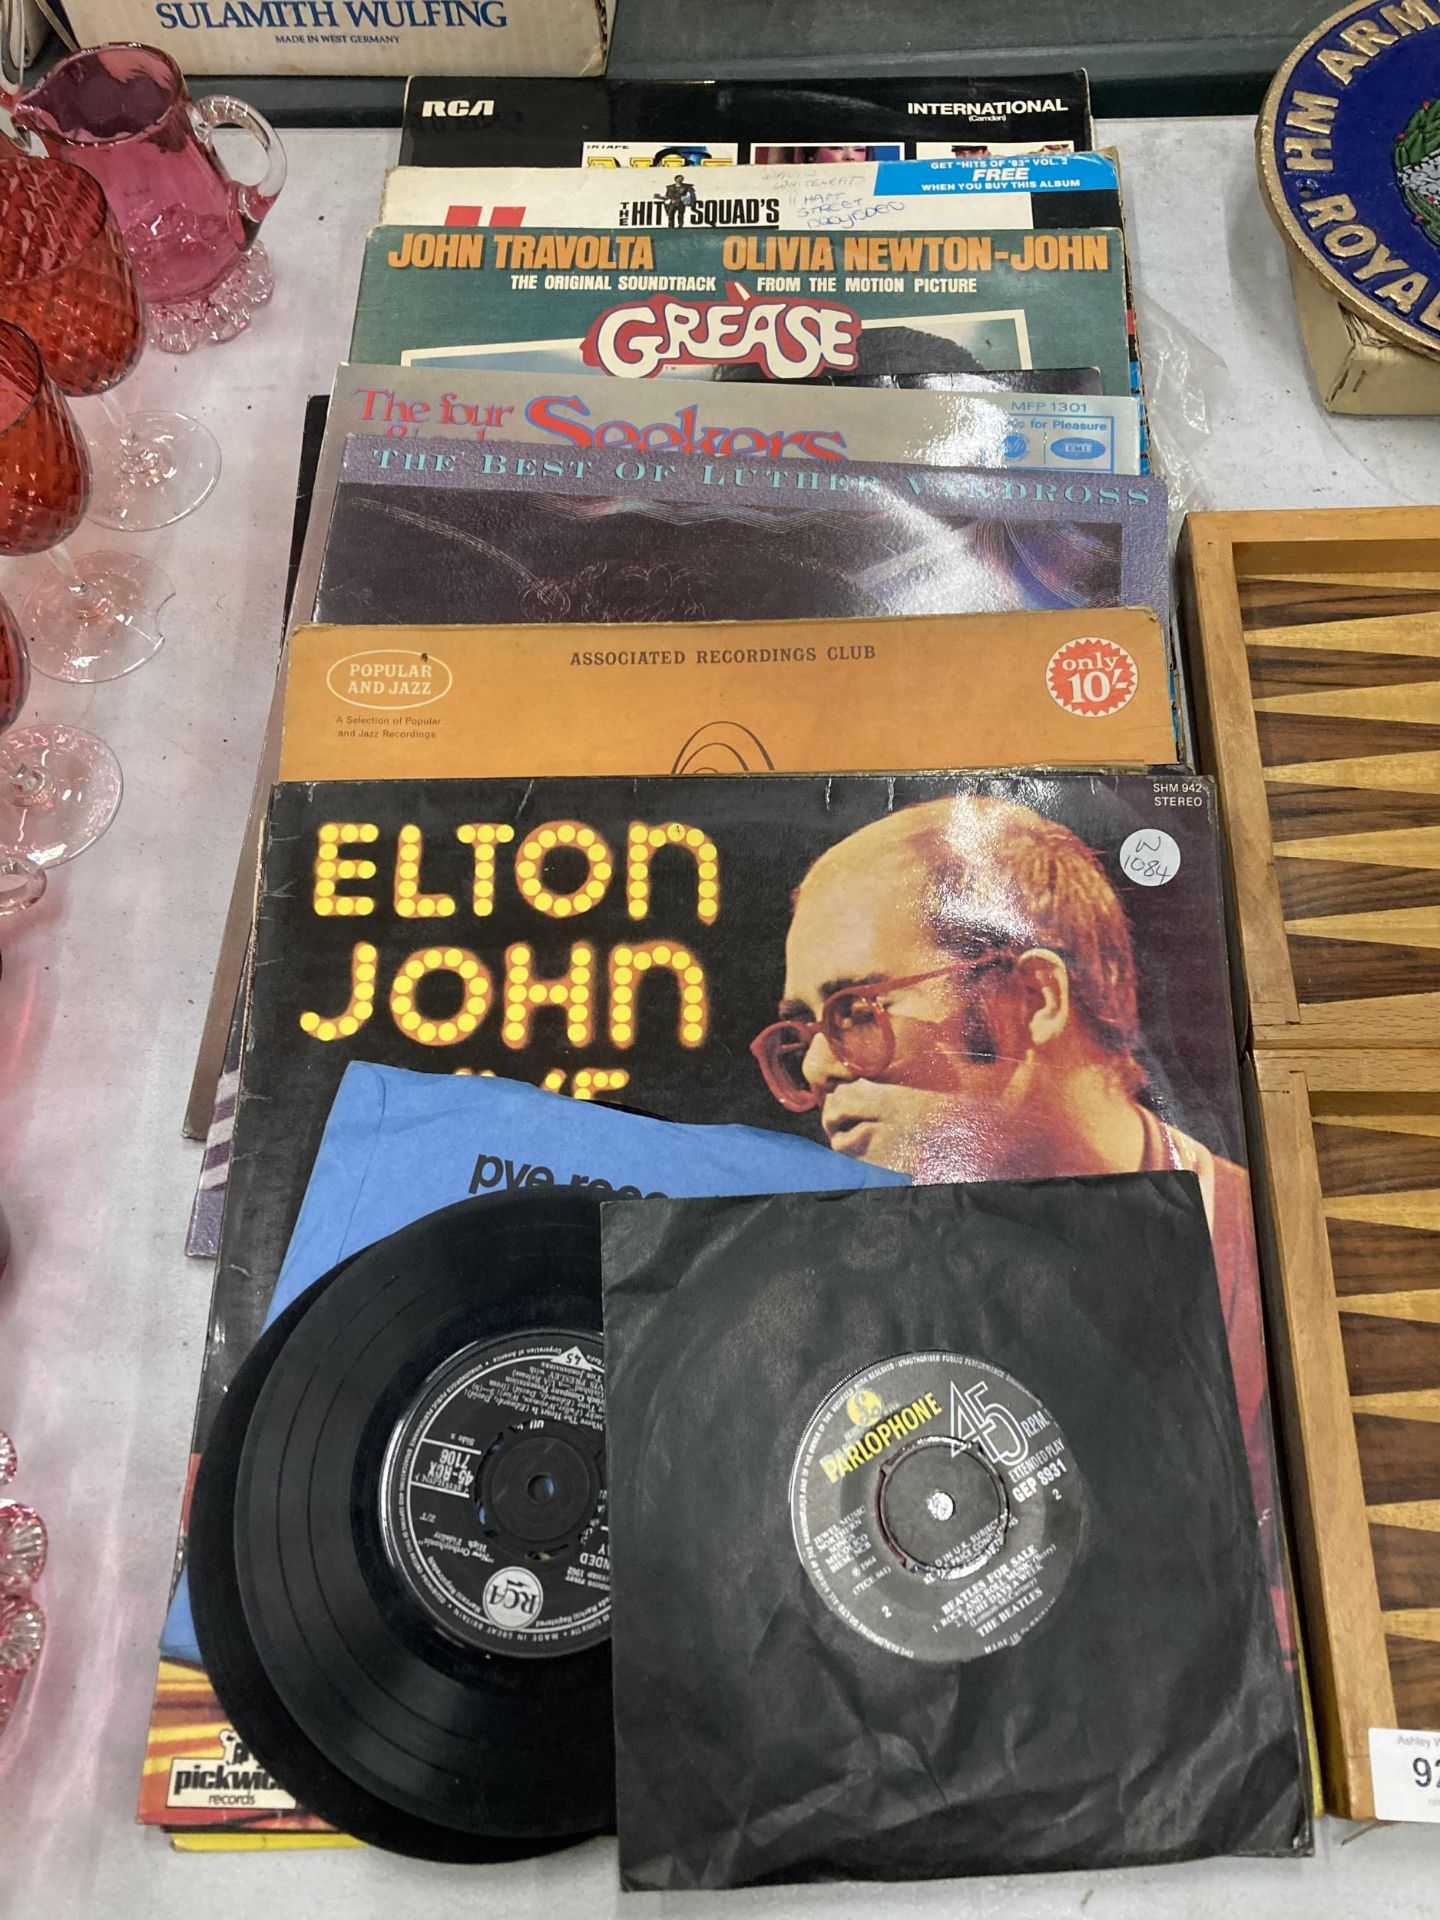 A COLLECTION OF 33RPM AND 45RPM VINYL RECORDS TO INCLUDE GREASE, ELTON JOHN, THE BEACH BOYS, ETC